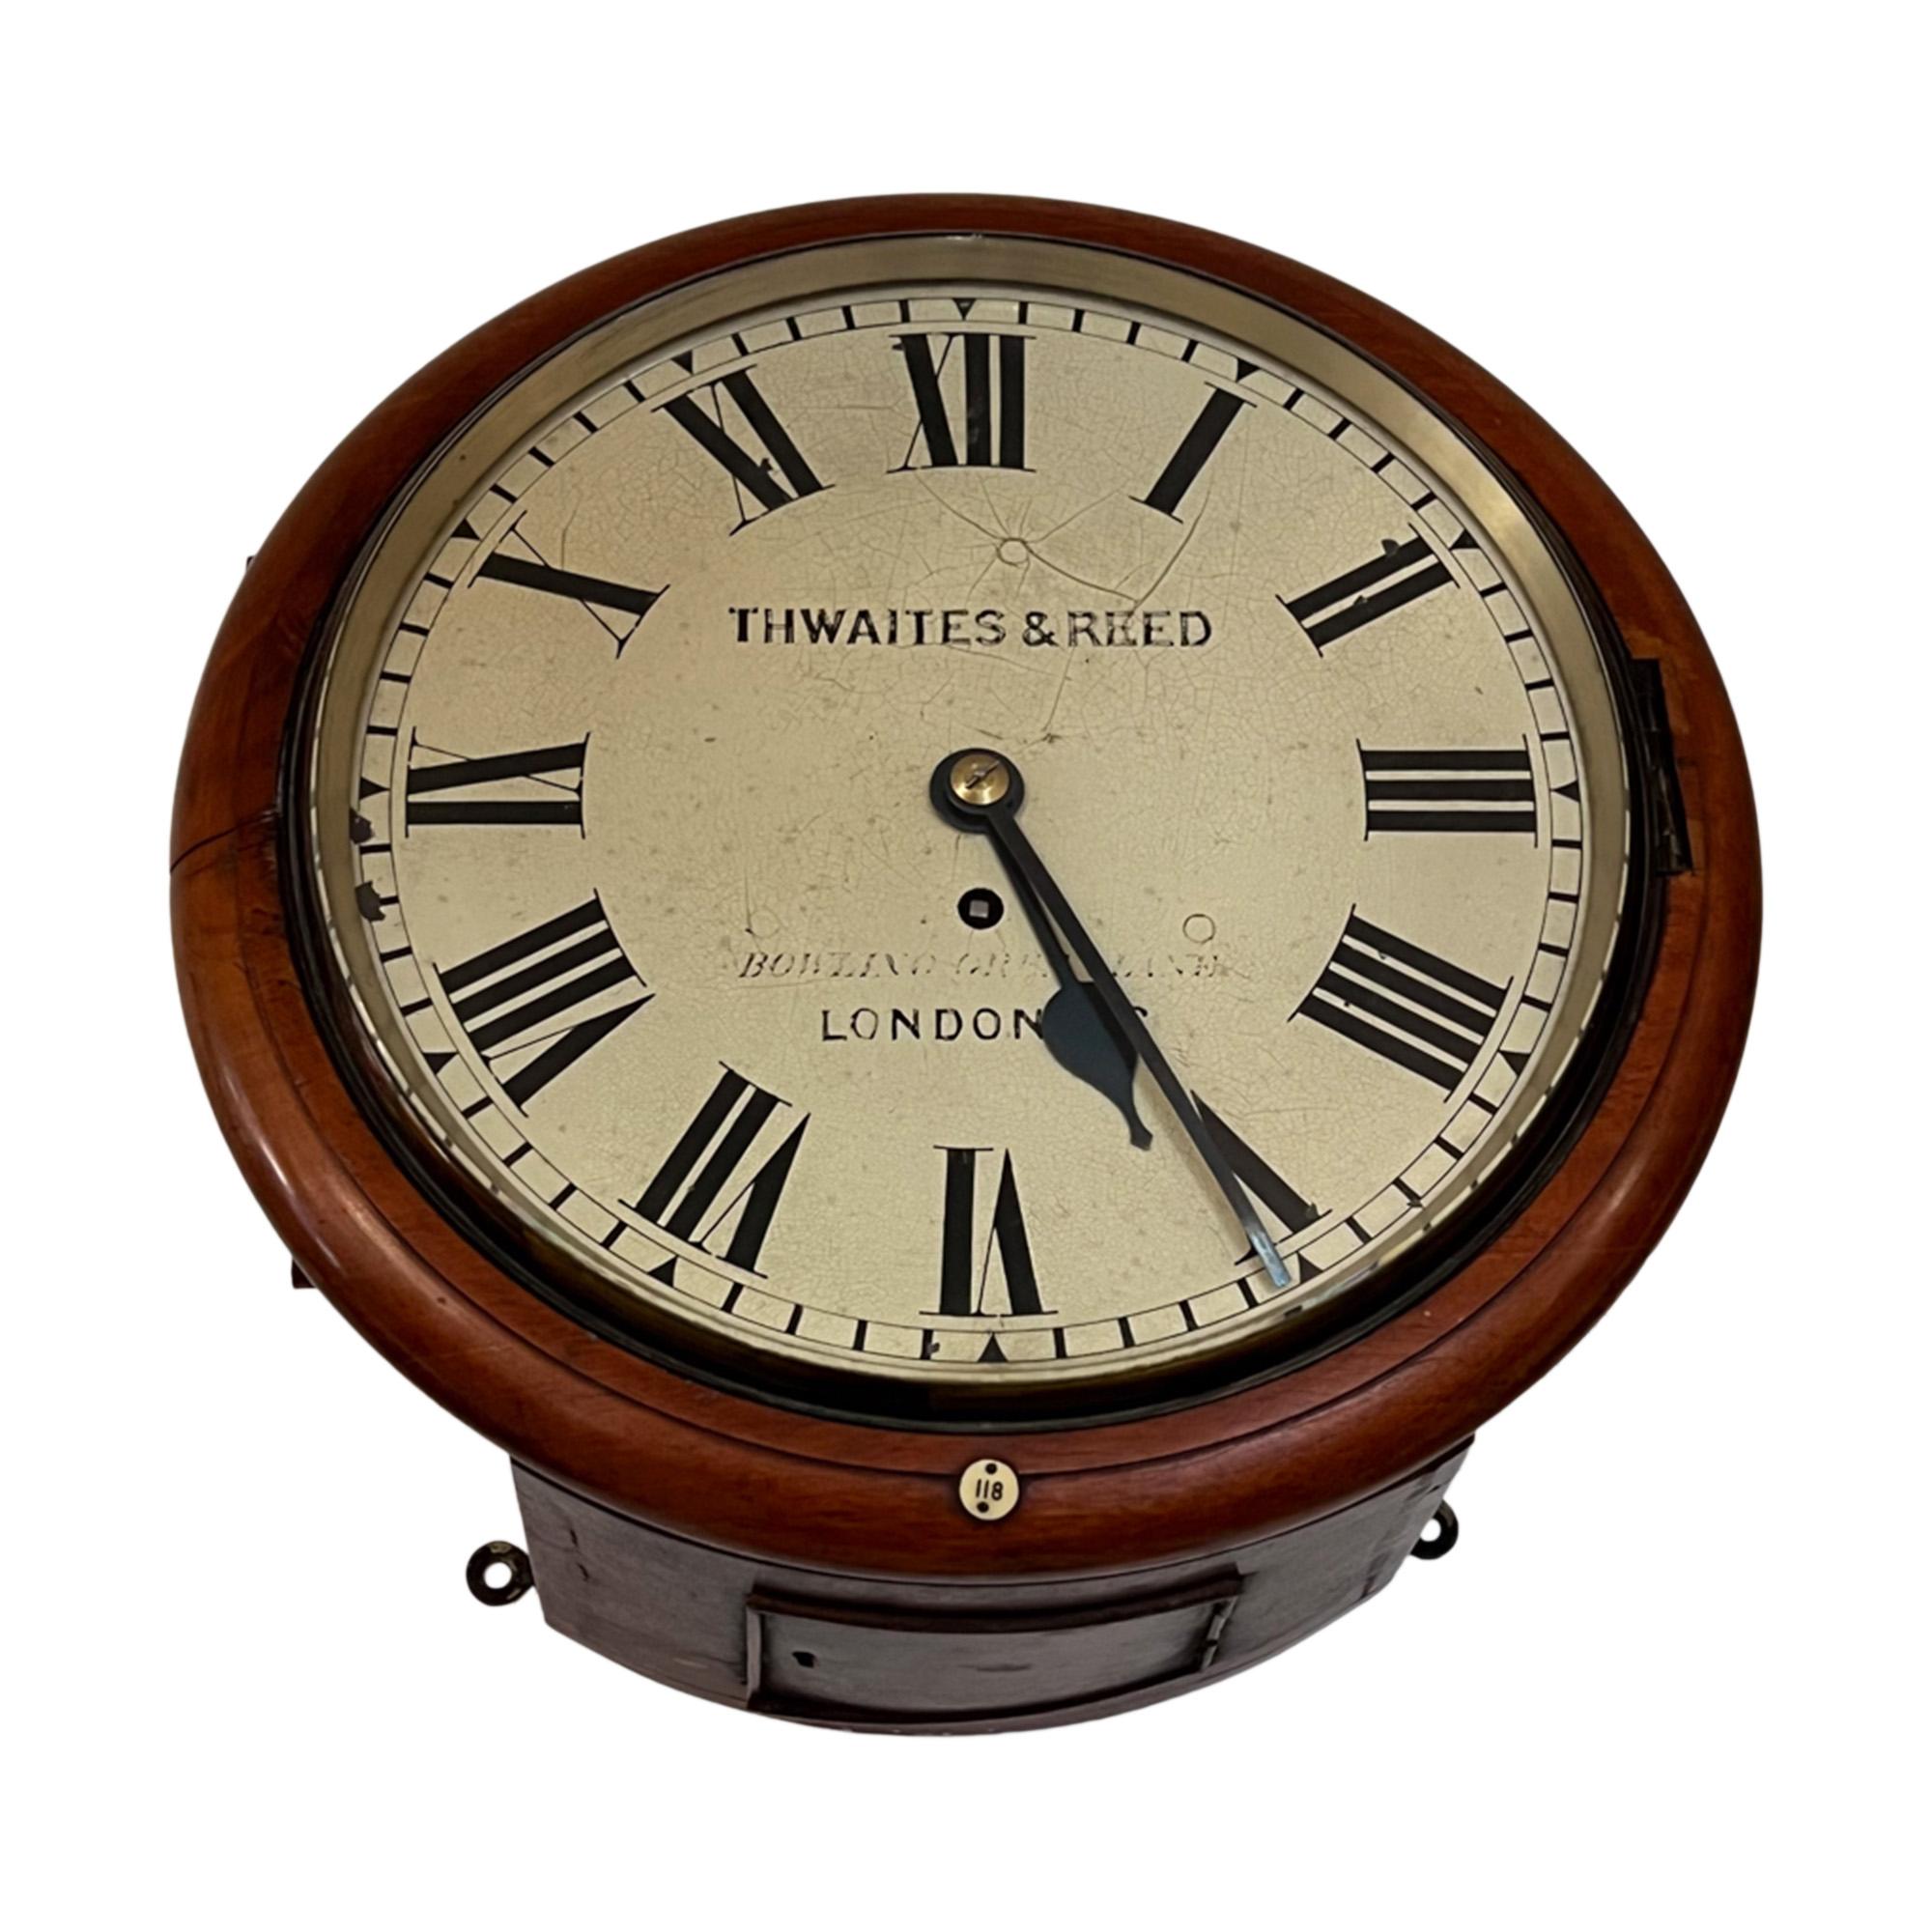 This beautiful wall clock was made by Thwaites and Reed in the late 19th century. 

The case is mahogany and numbered 118 with a small ivorine plaque - these clocks were made for establishments such as the Inns of Court and the Bank of England in